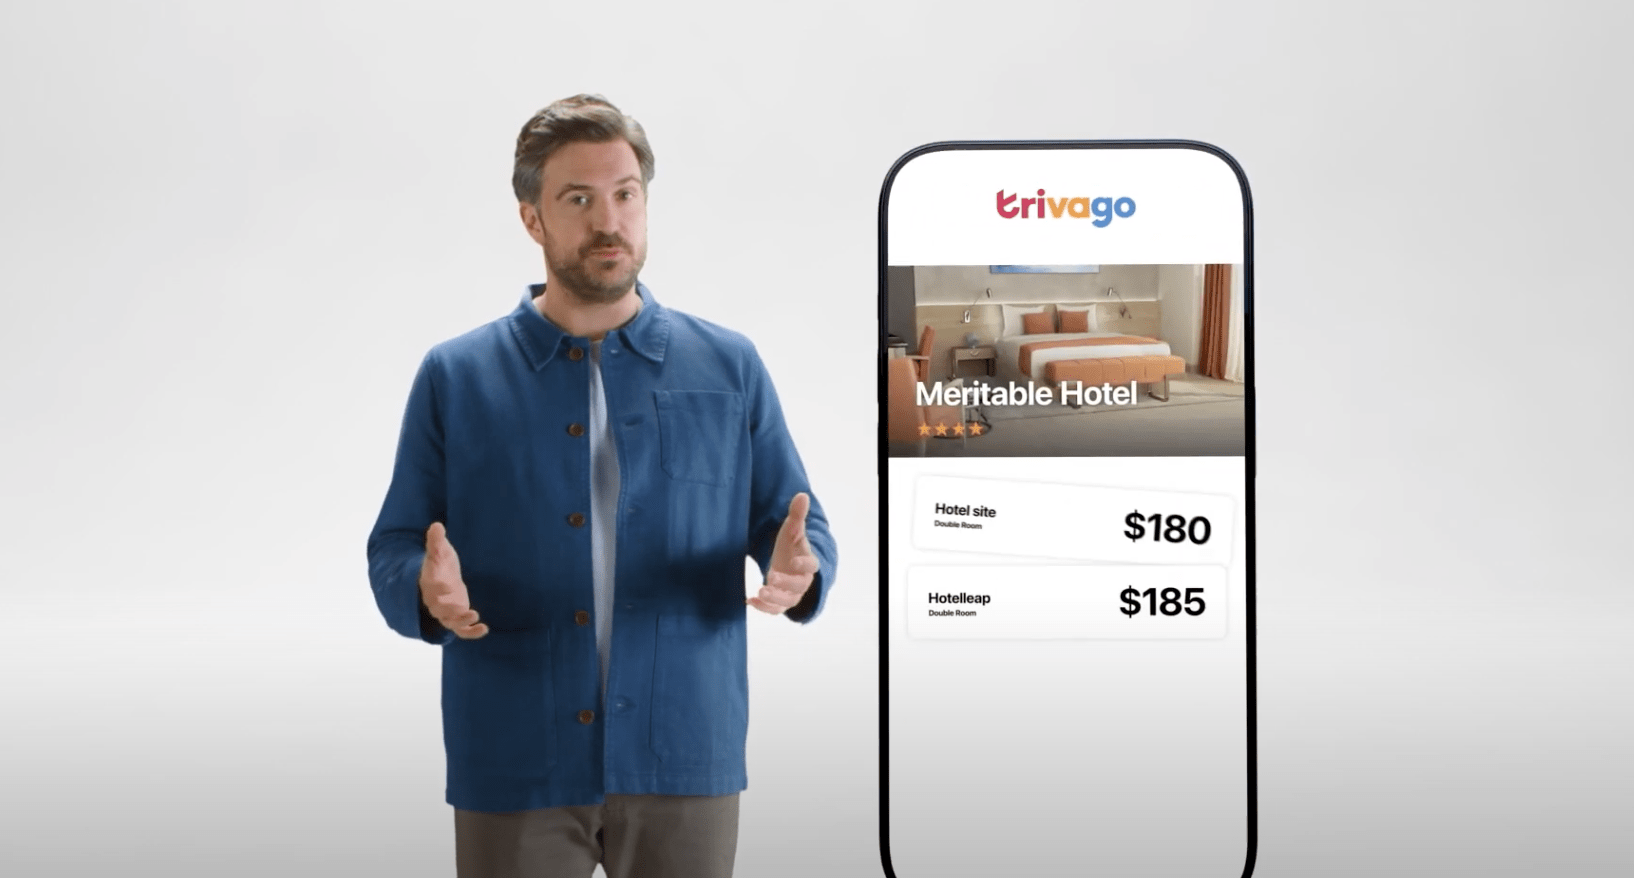 Watch: Trivago rebrands with new visual identity in first-of-its-kind AI-driven ad campaign